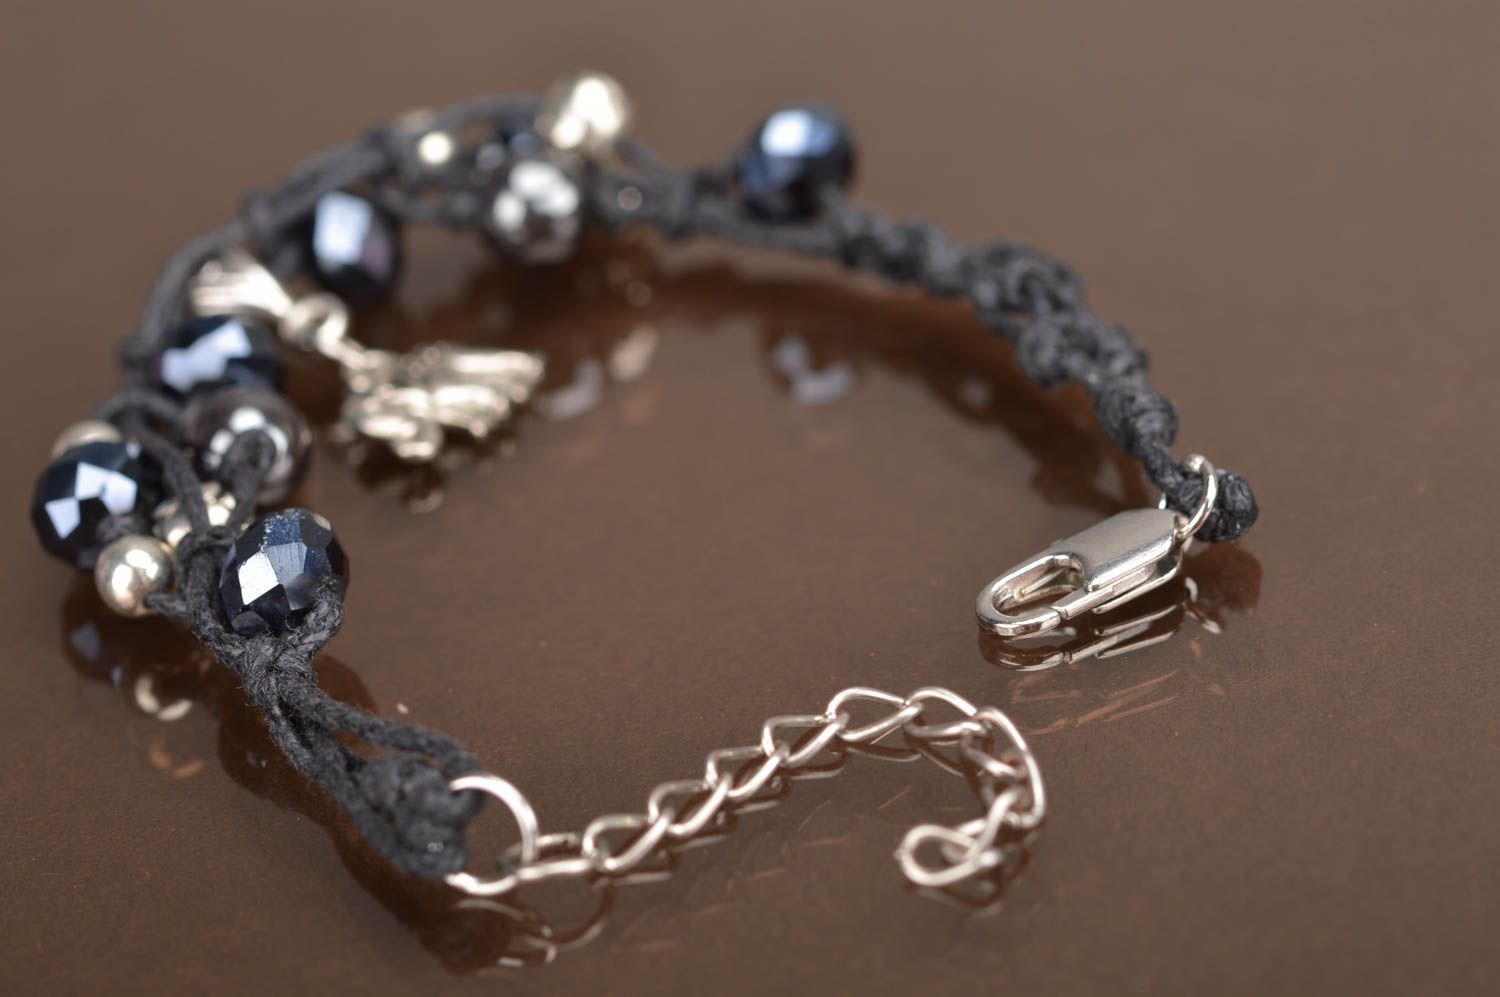 Handmade cute bracelet made of waxed lace with crystal beads and charm photo 5